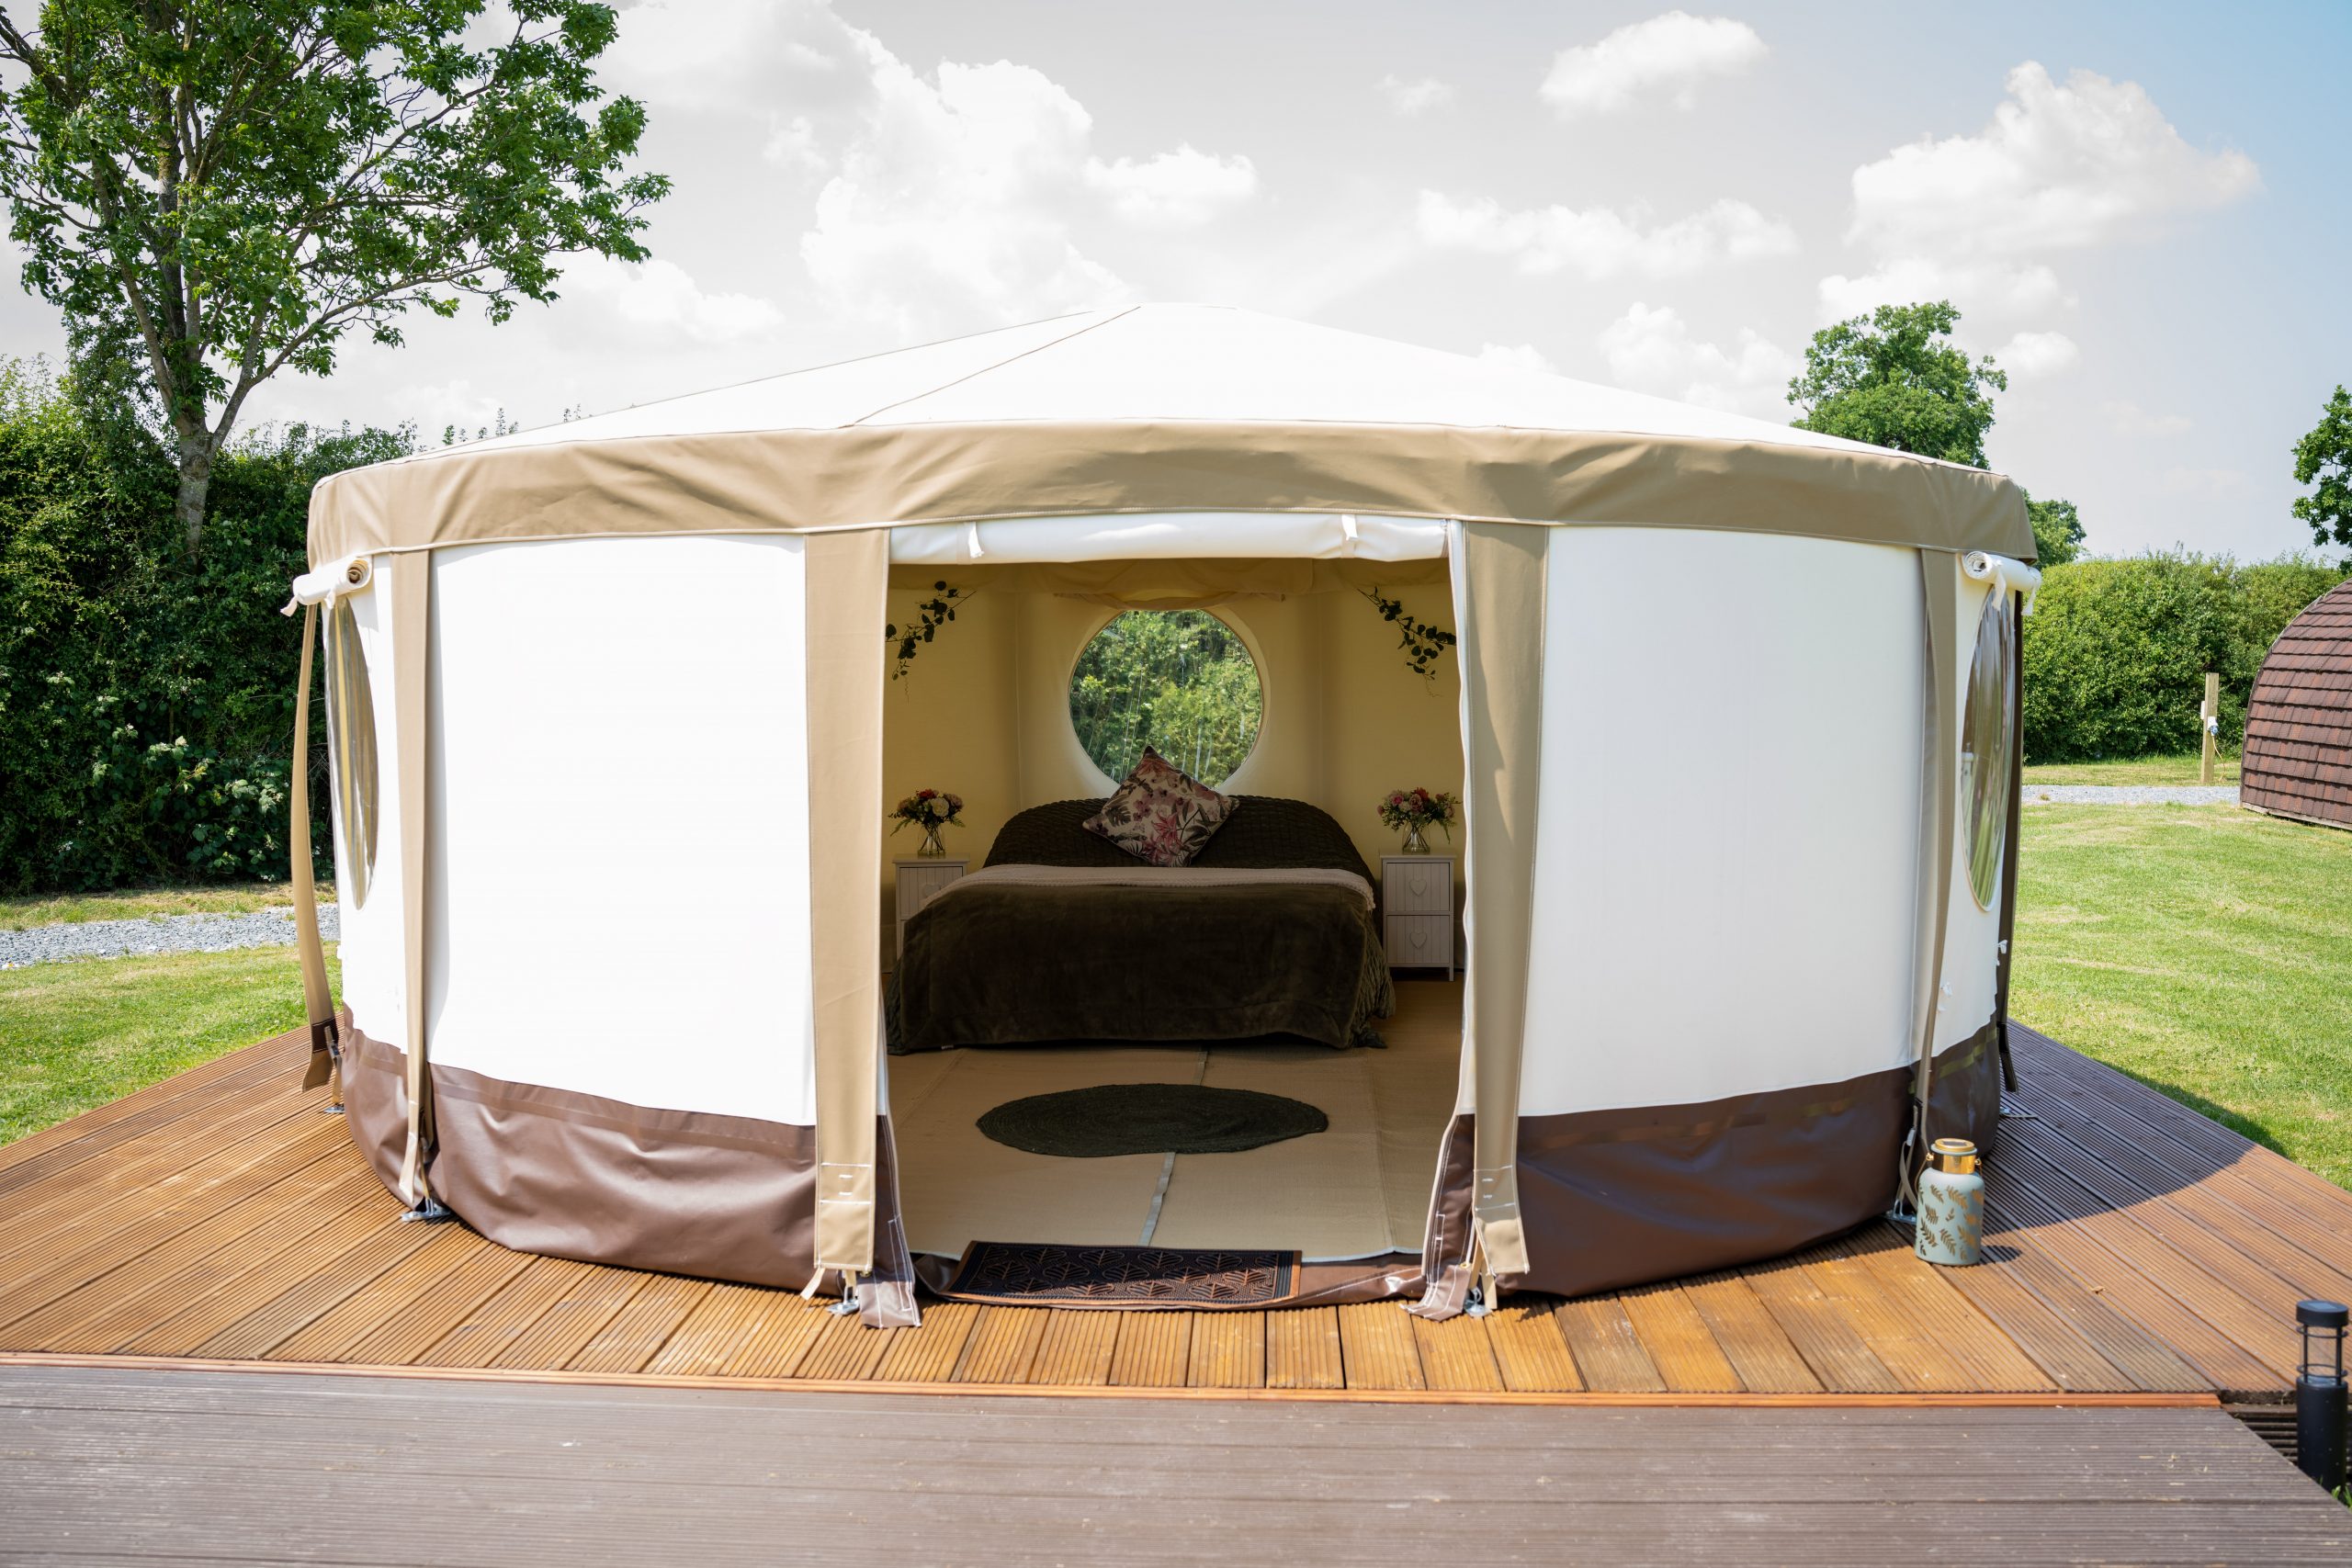 Pitch and Canvas | Glamping and Camping in Cheshire | Kopie tent on deck